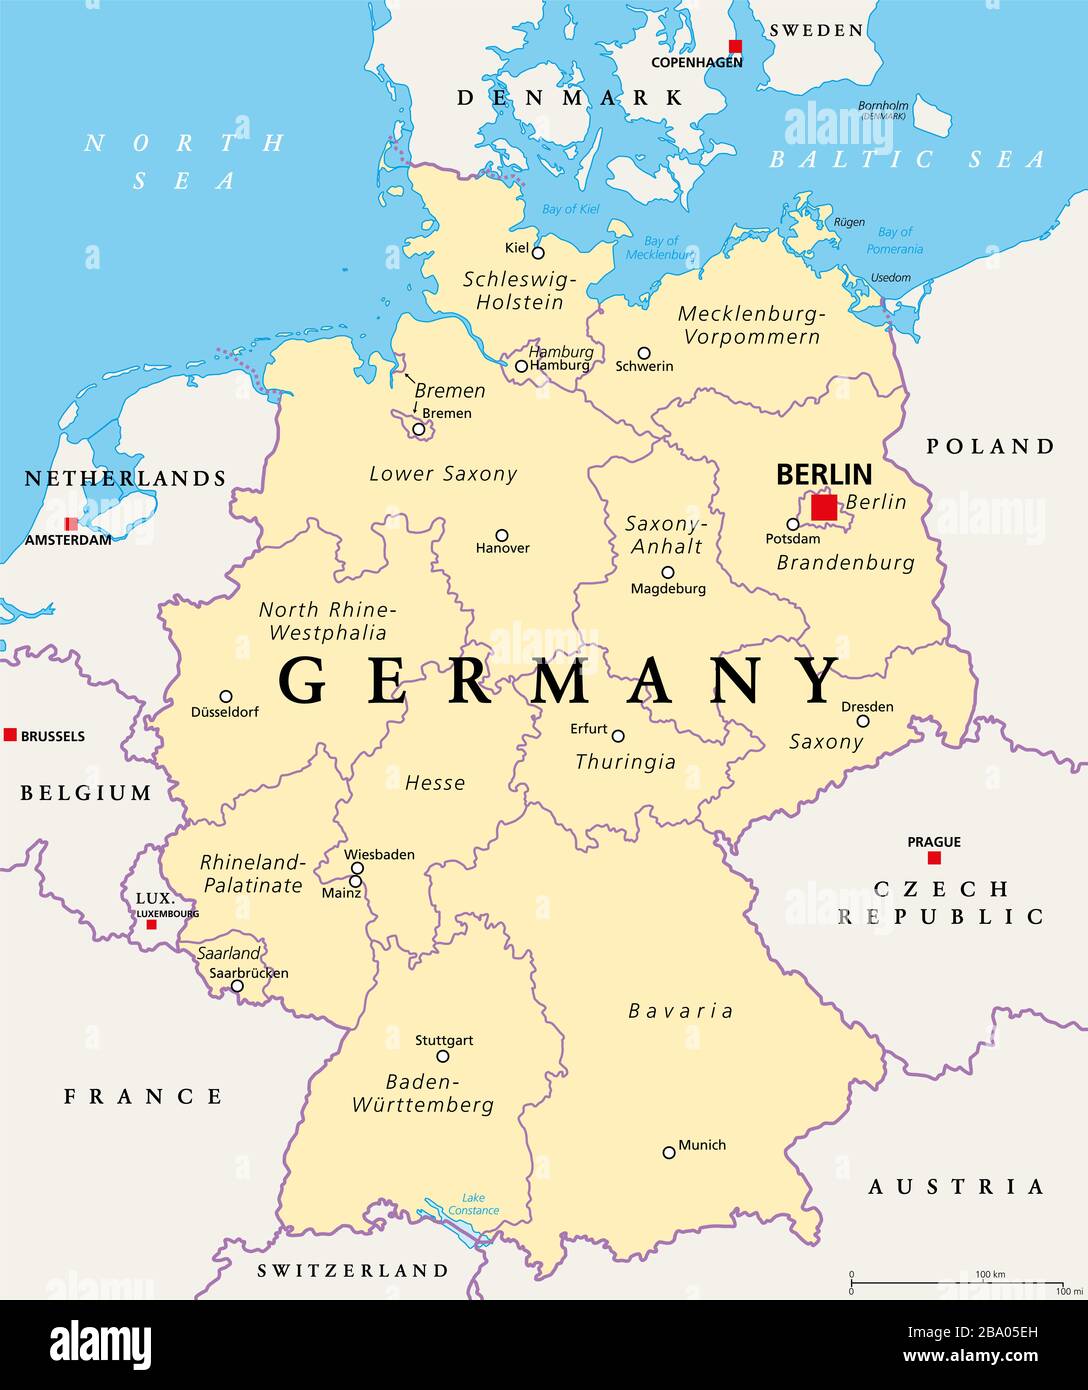 A Political Map Of Germany - Map of world